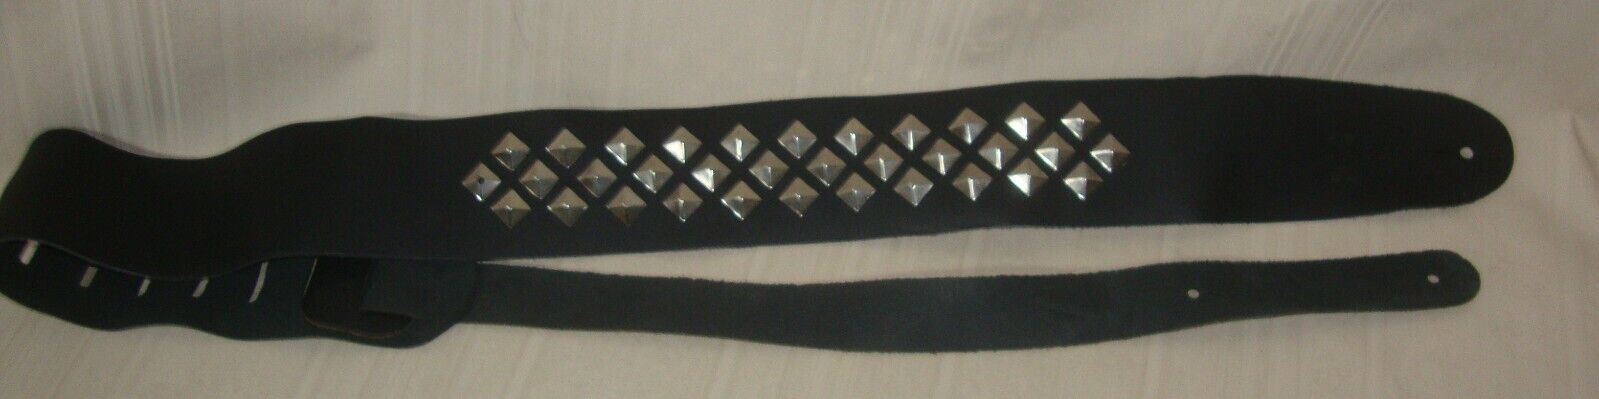 Primary image for GUITAR STRAPS for Acoustic Electric Guitars Black Stud PERRI'S P25STD STUDS